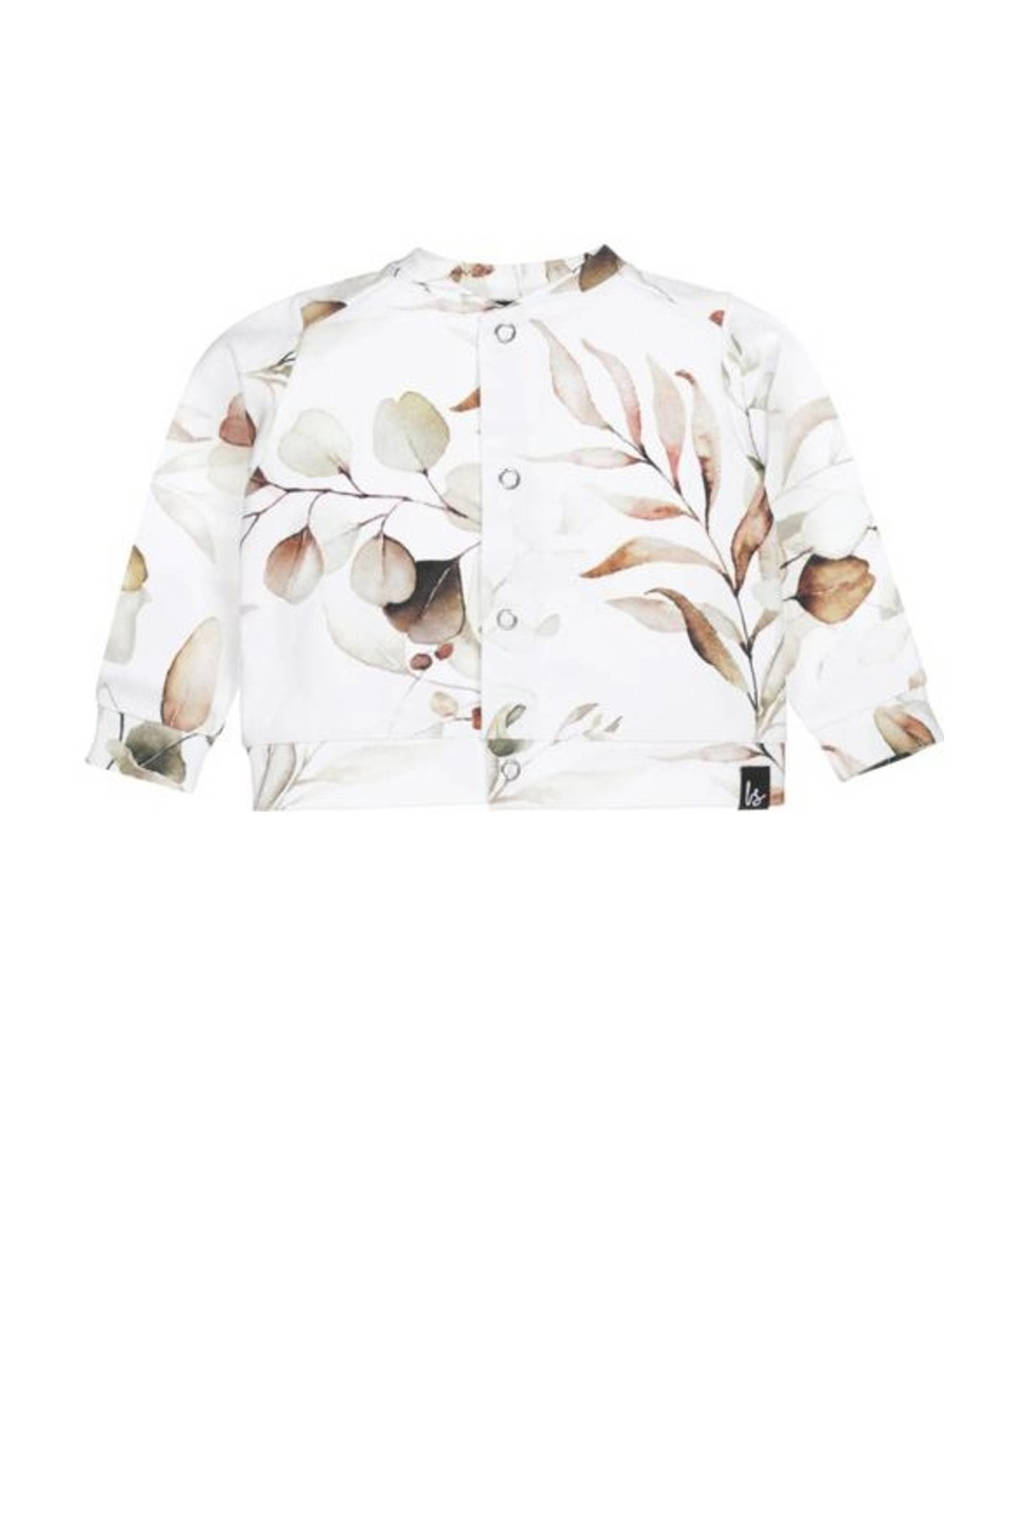 Babystyling baby jasje met all over print off white/bruin